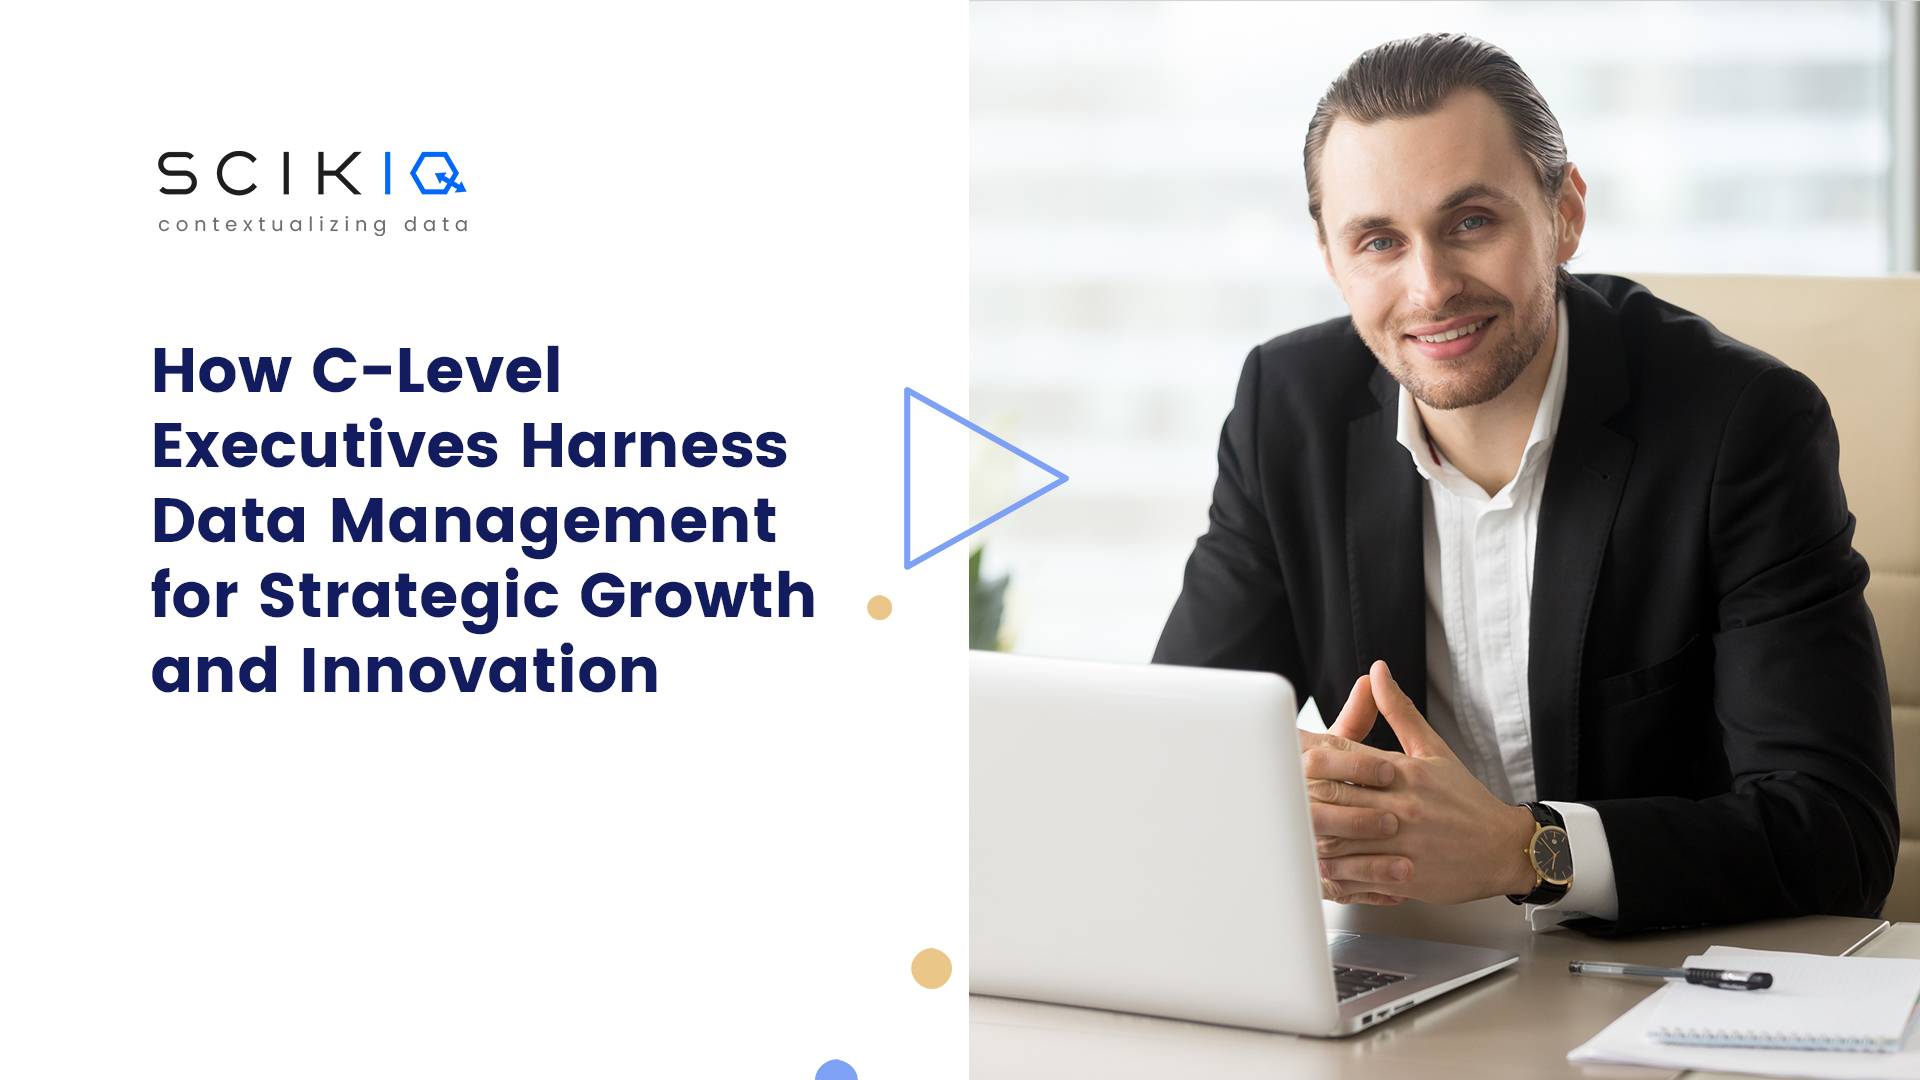 How C-Level Executives Harness Data Management for Strategic Growth and Innovation